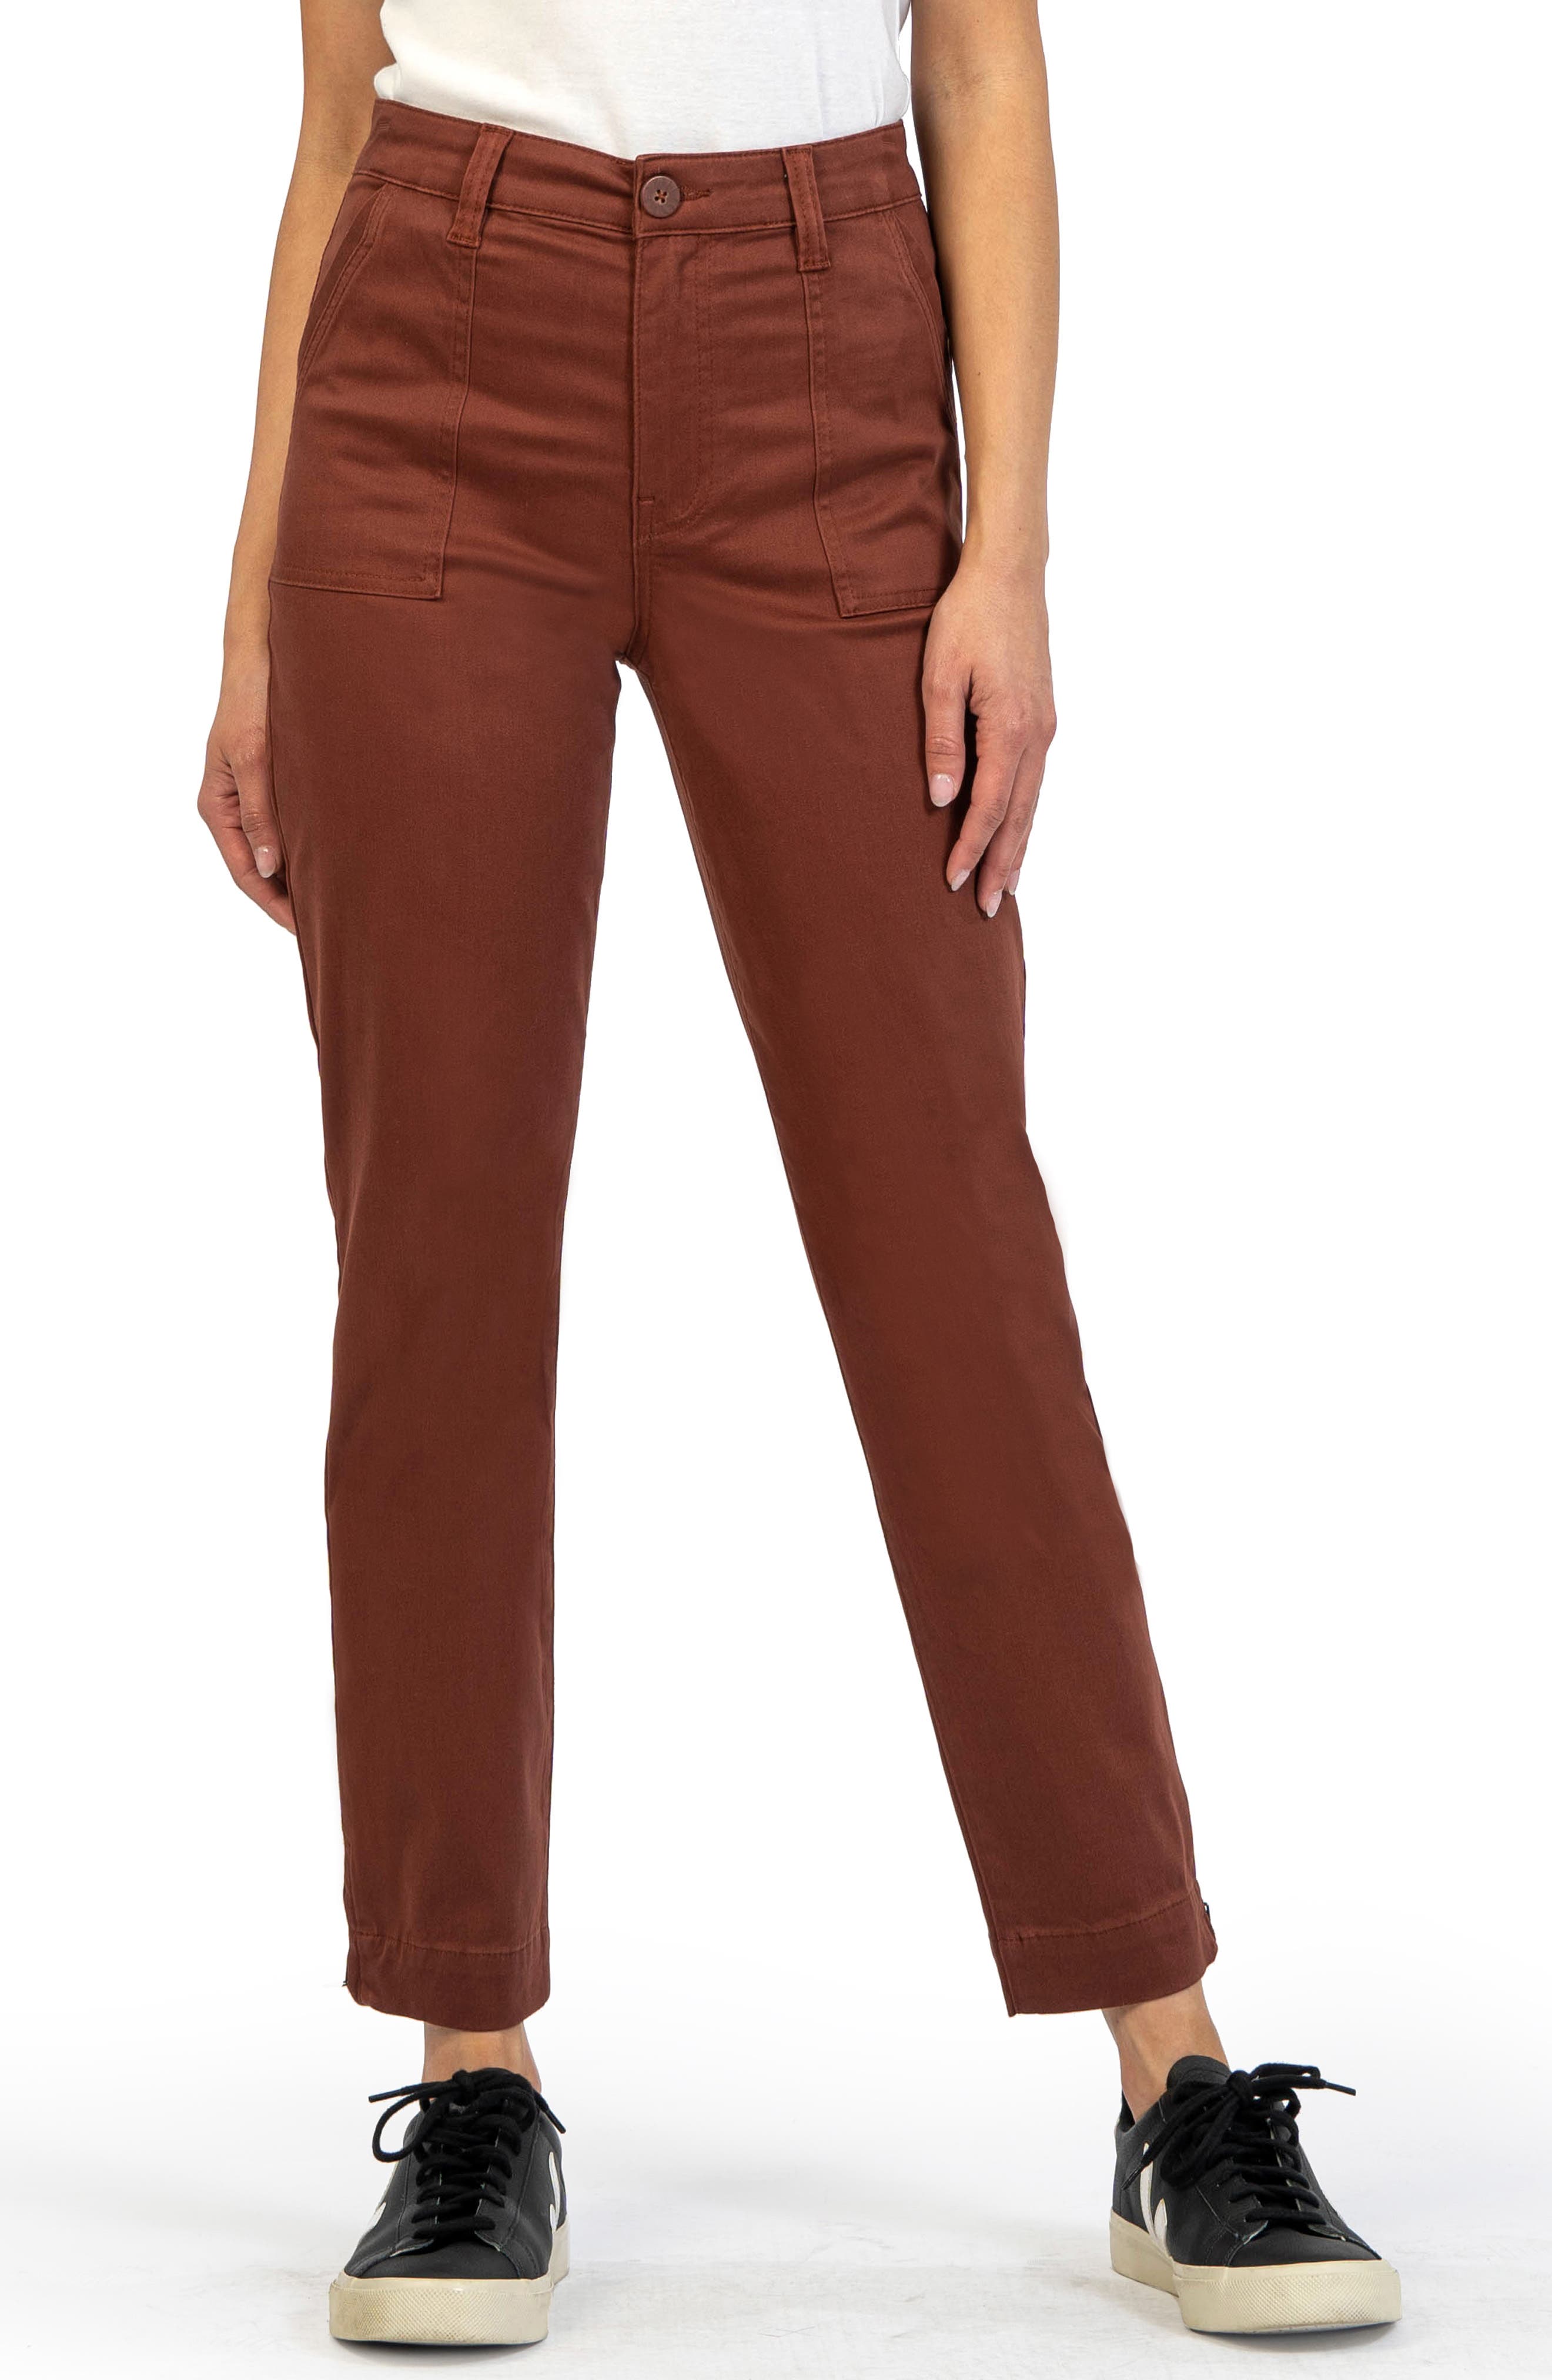 Brown Slacks and Chinos Straight-leg trousers Womens Clothing Trousers Berna Fleece Trouser in Dark Brown 